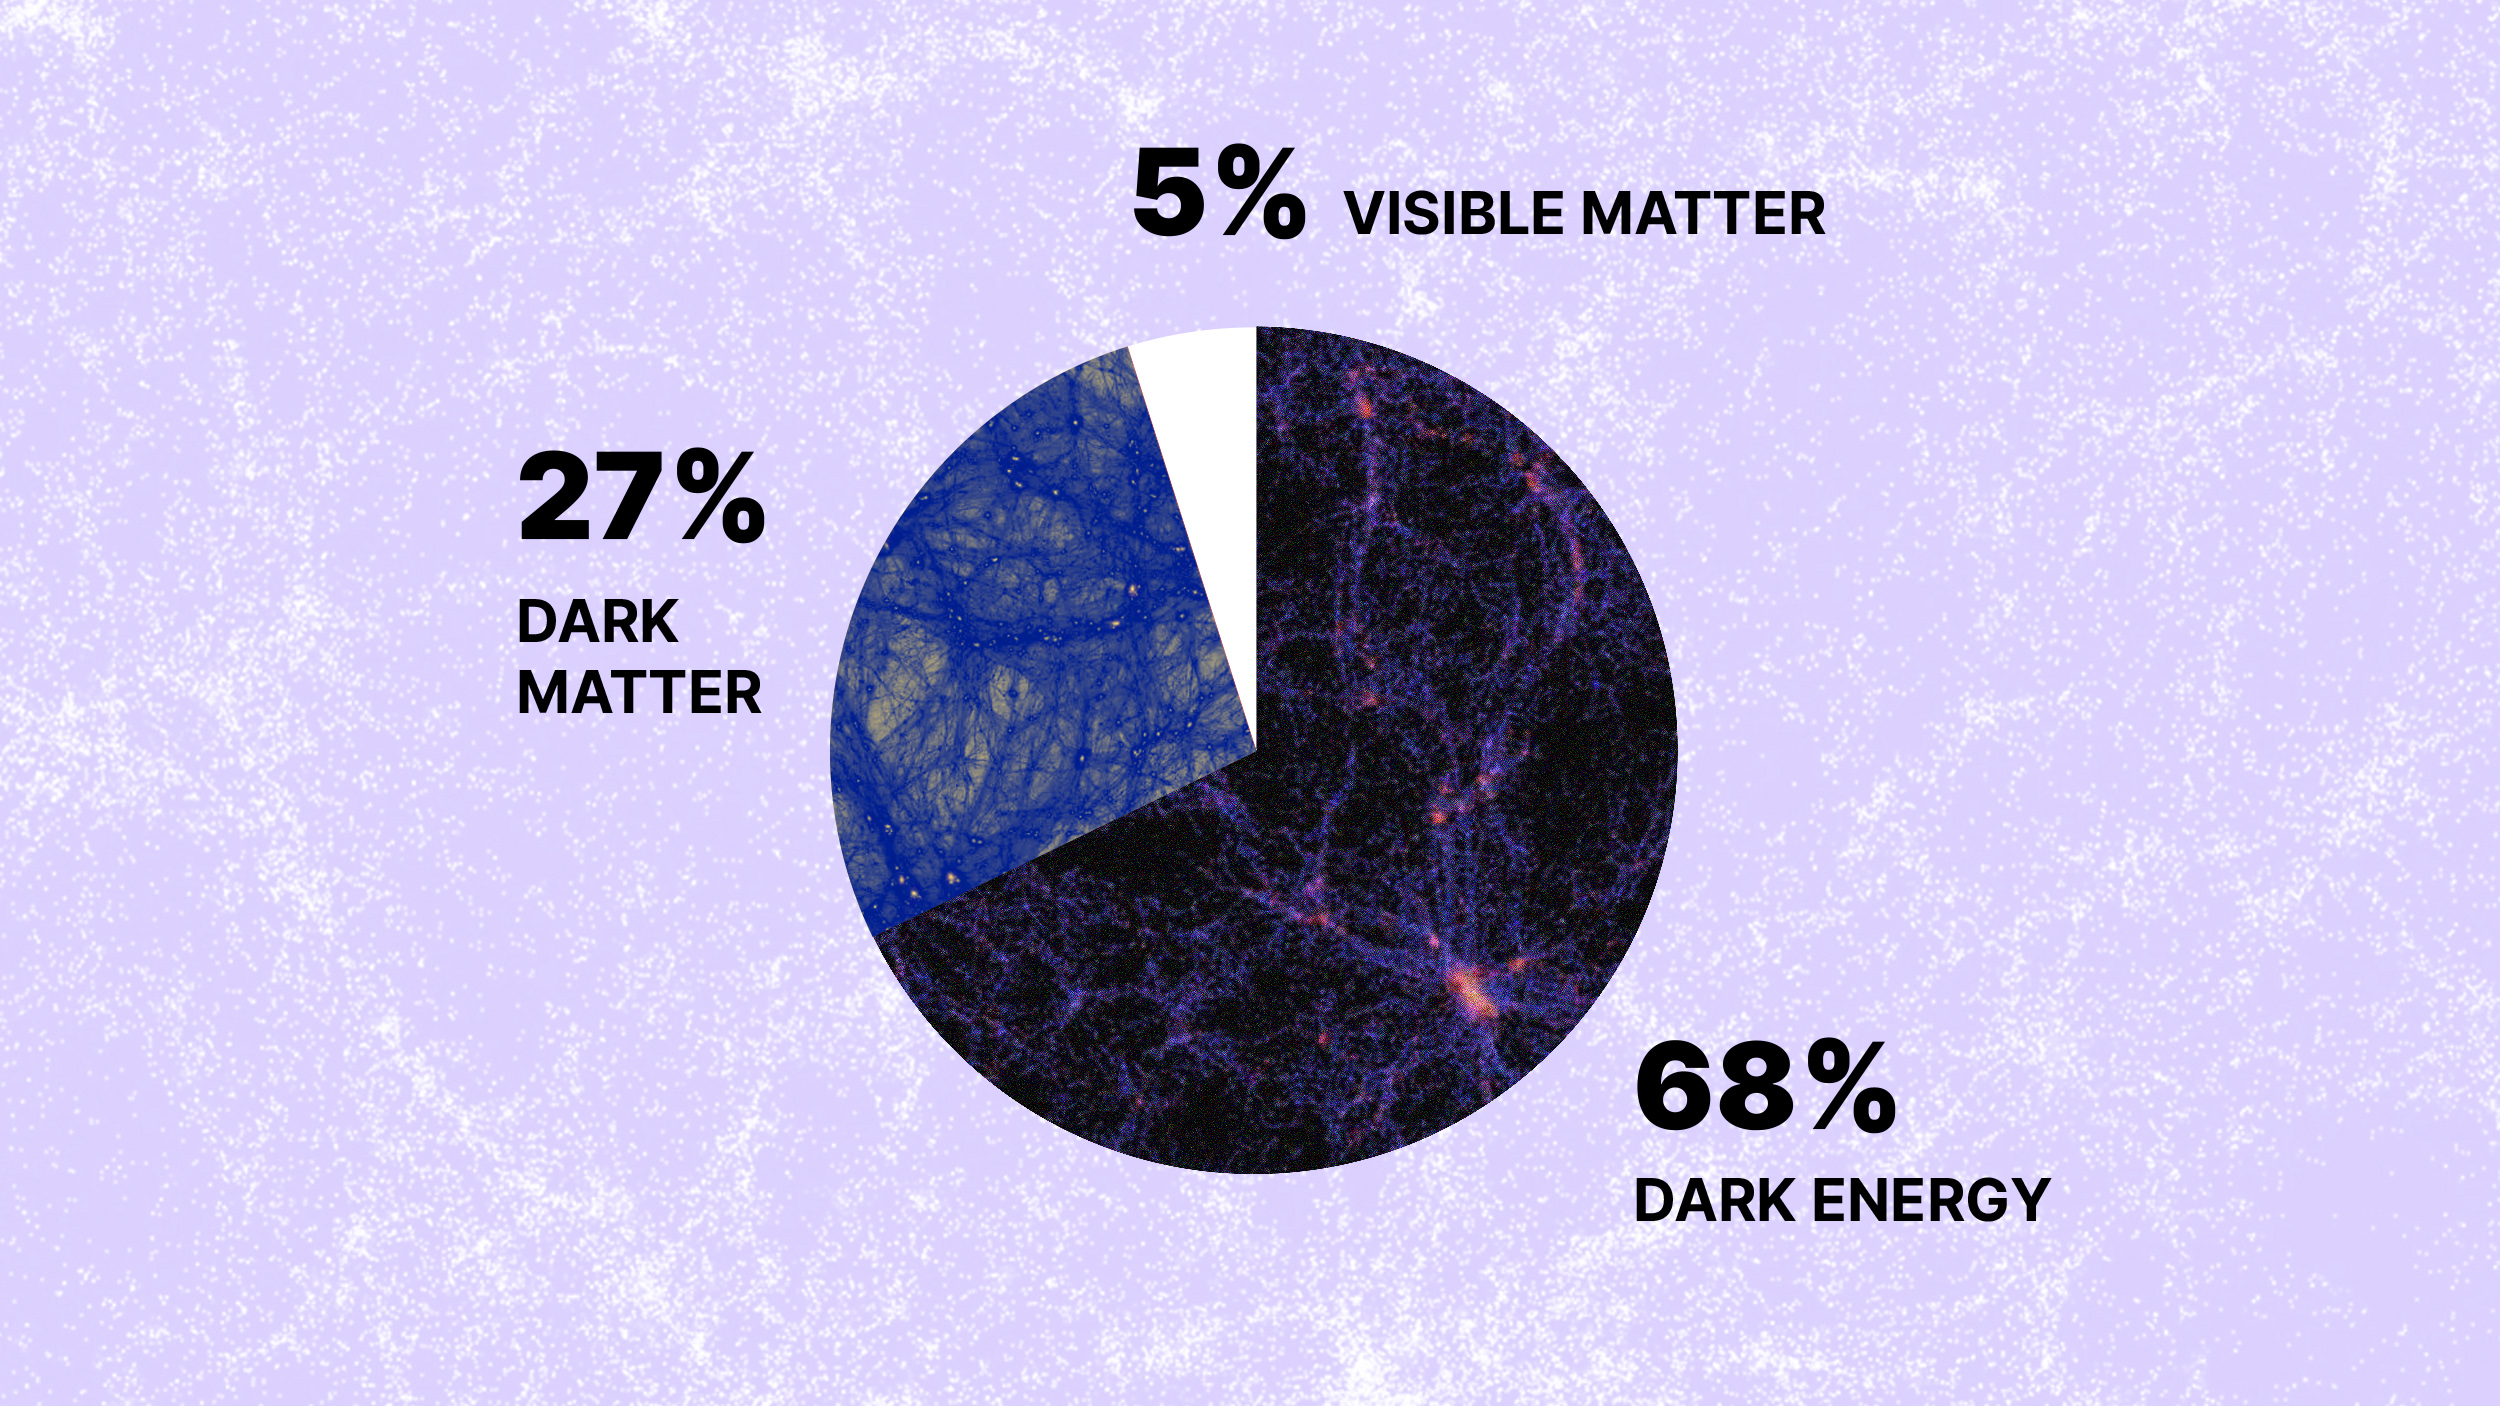 Composition of the dark energy prominence universe showing percentages of dark energy, dark matter, and visible matter.